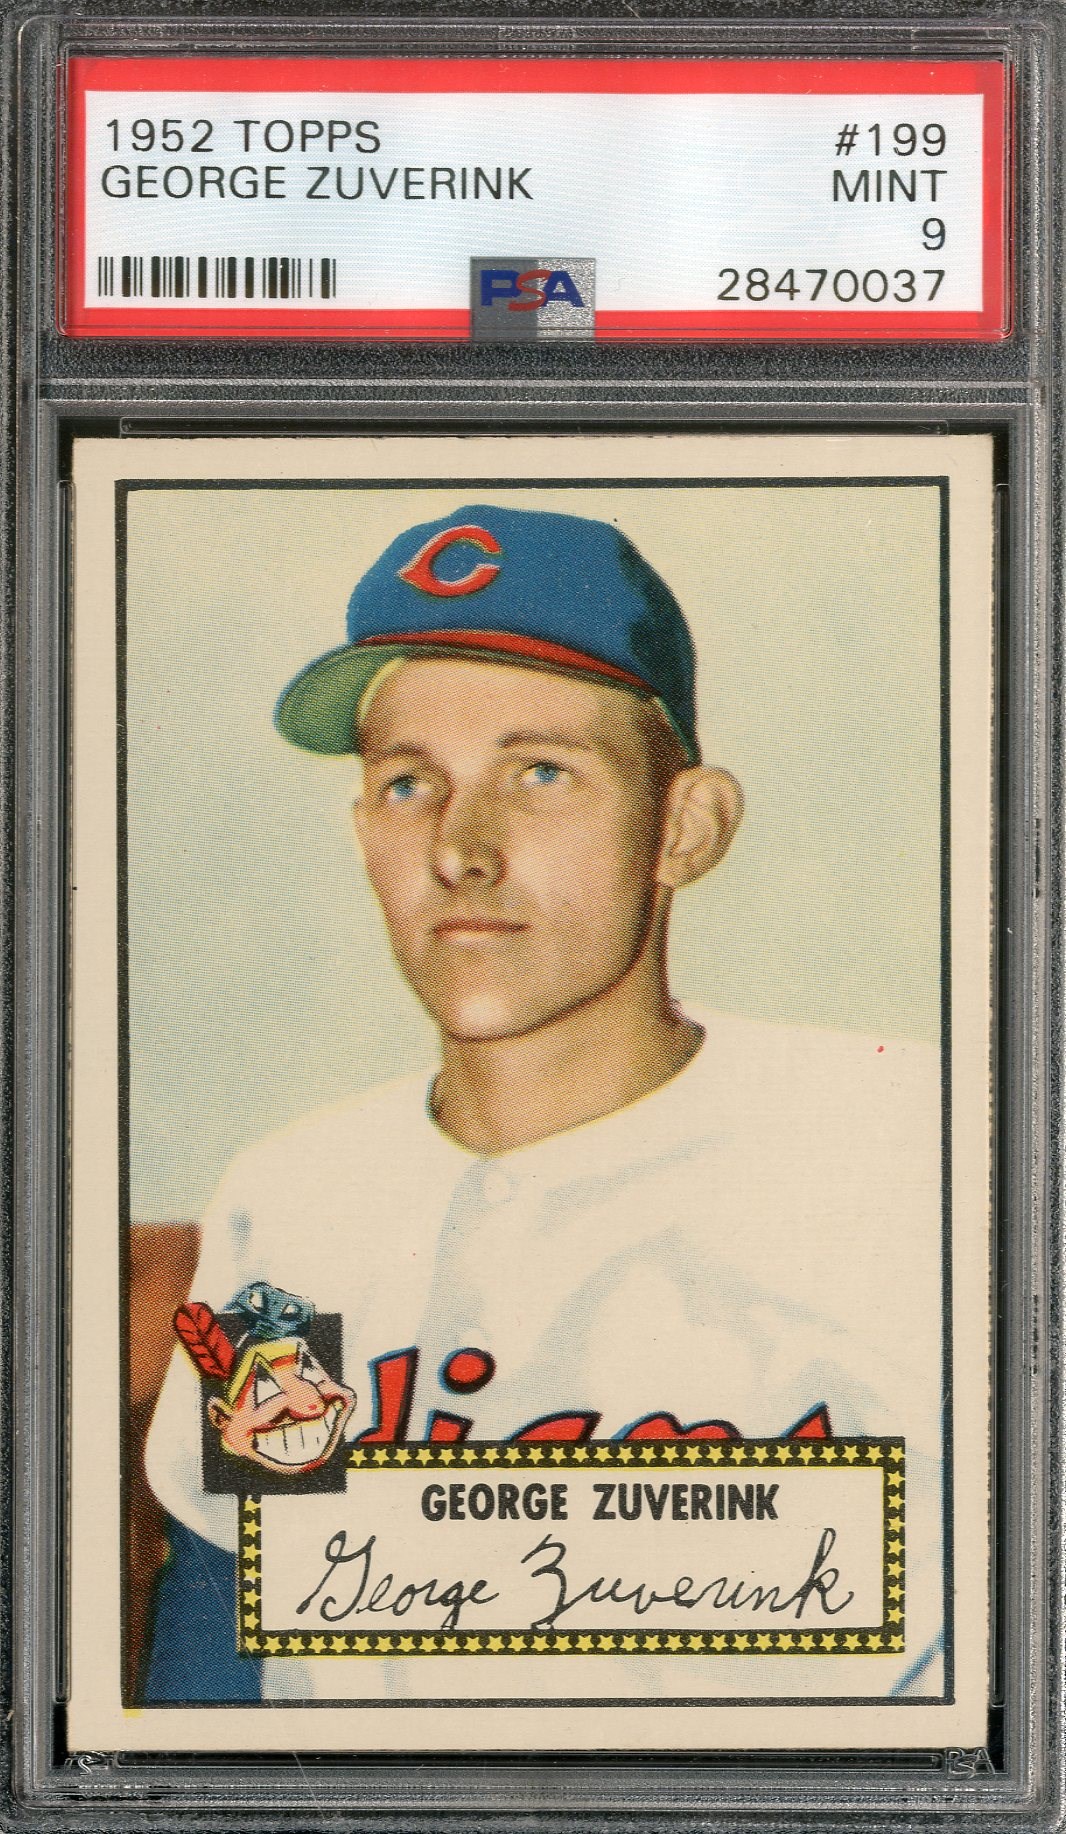 Baseball and Trading Cards - 1952 Topps #199 George Zuverink - PSA MINT 9